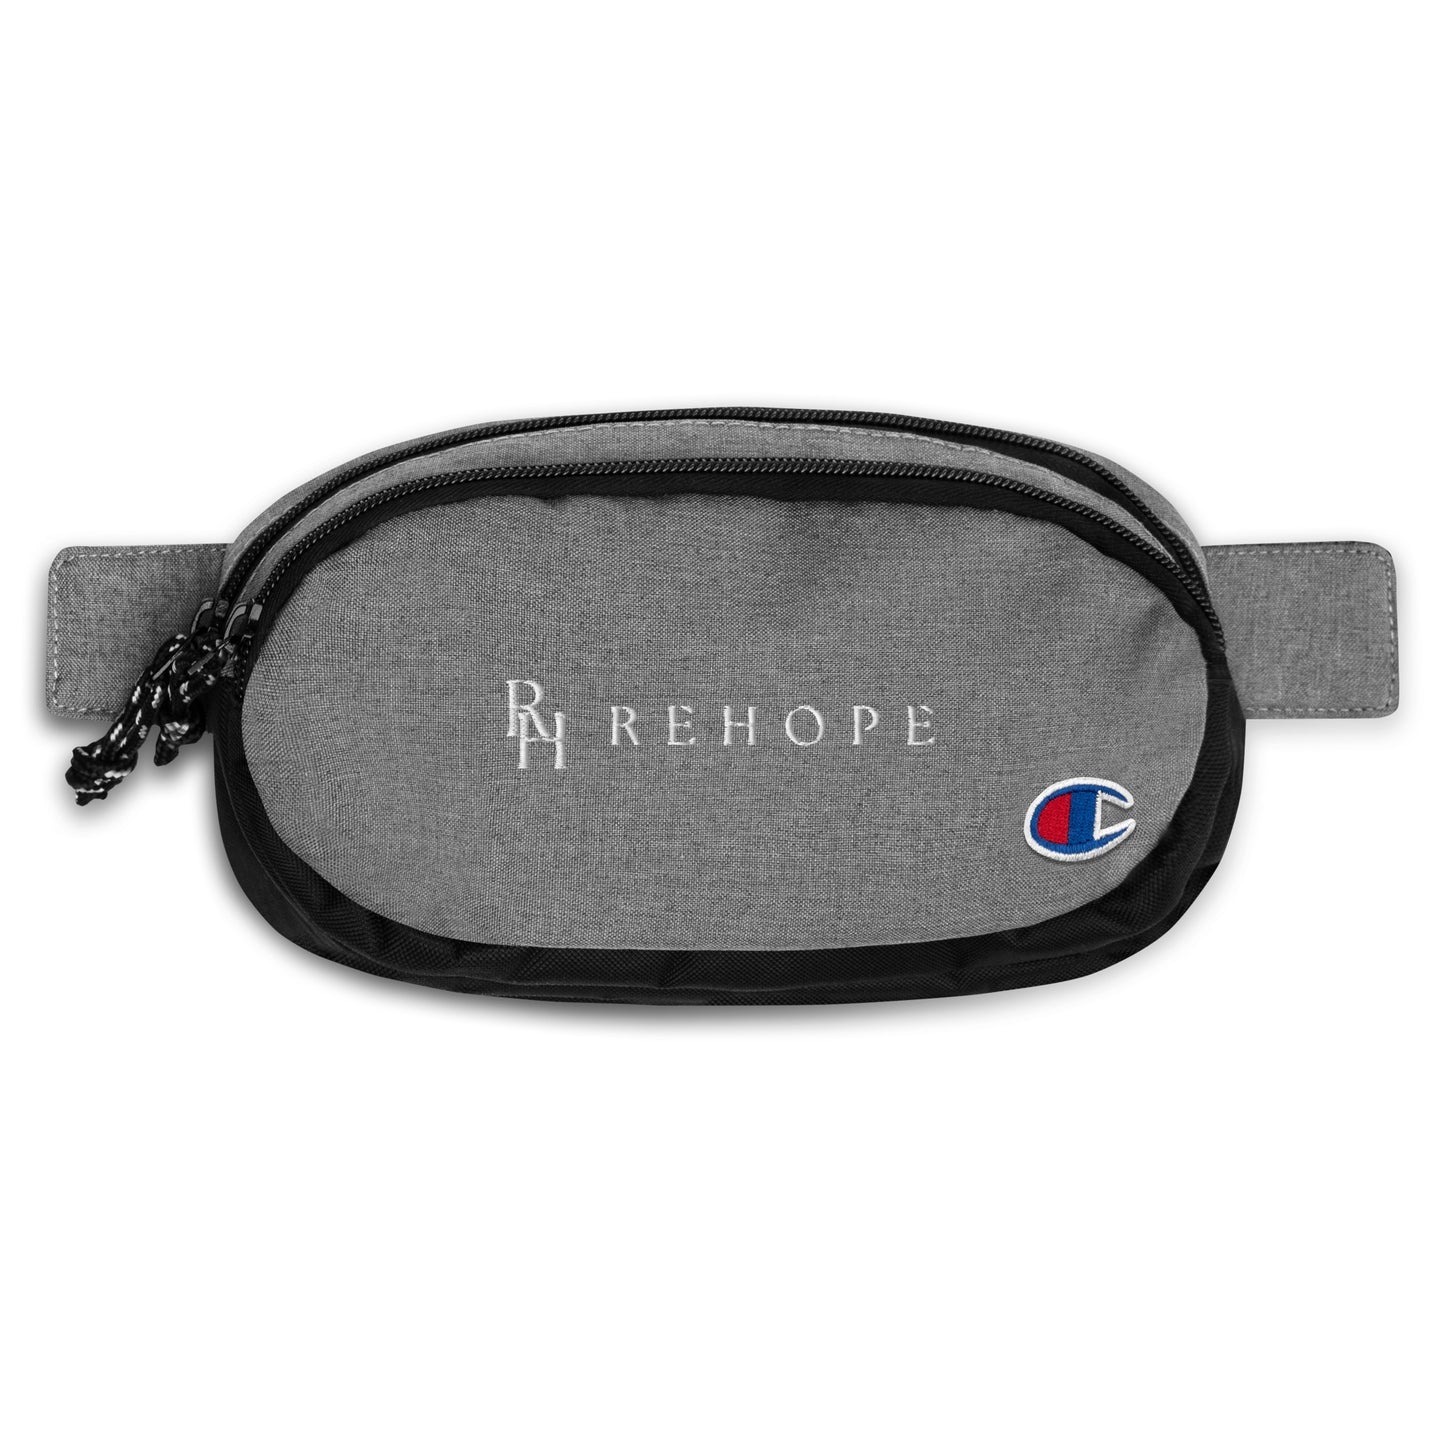 REHOPE Champion Fanny Pack